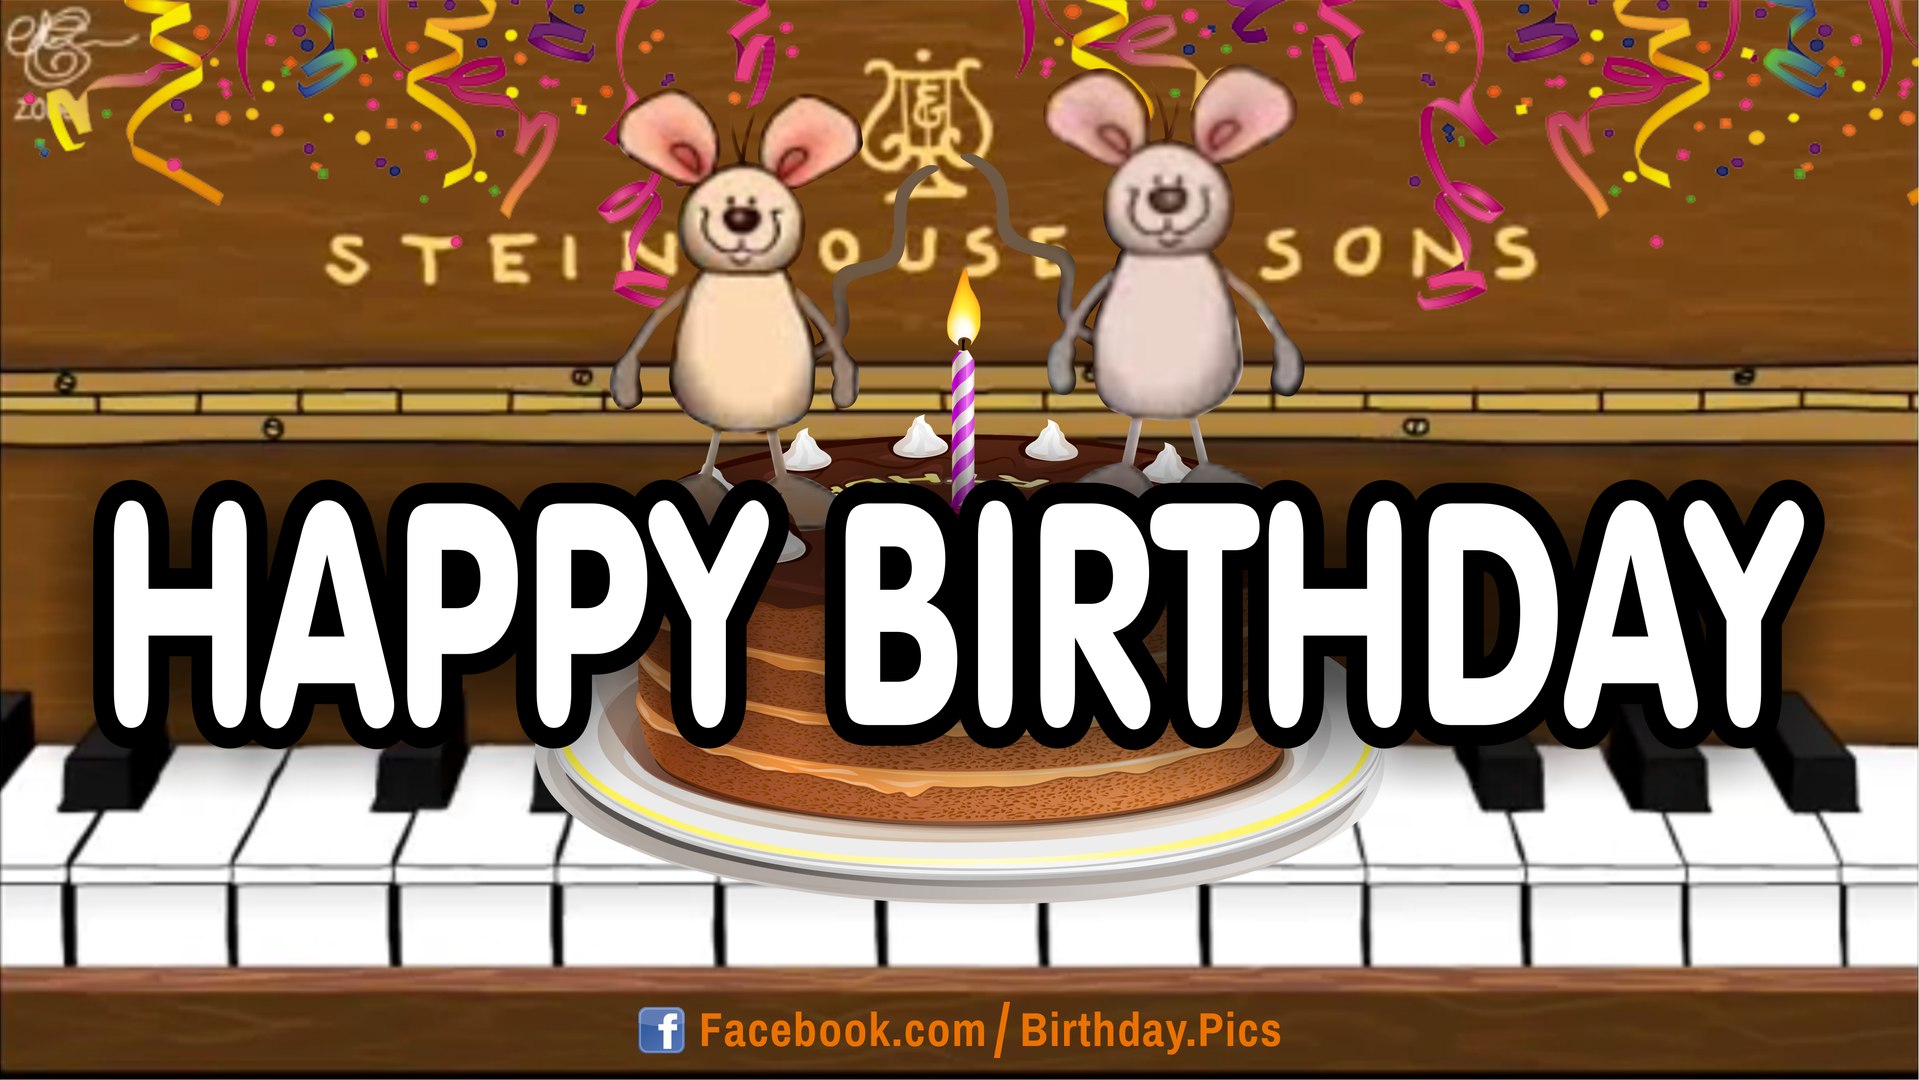 Happy Birthday Musical Mice Playing Piano - Dailymotion Video